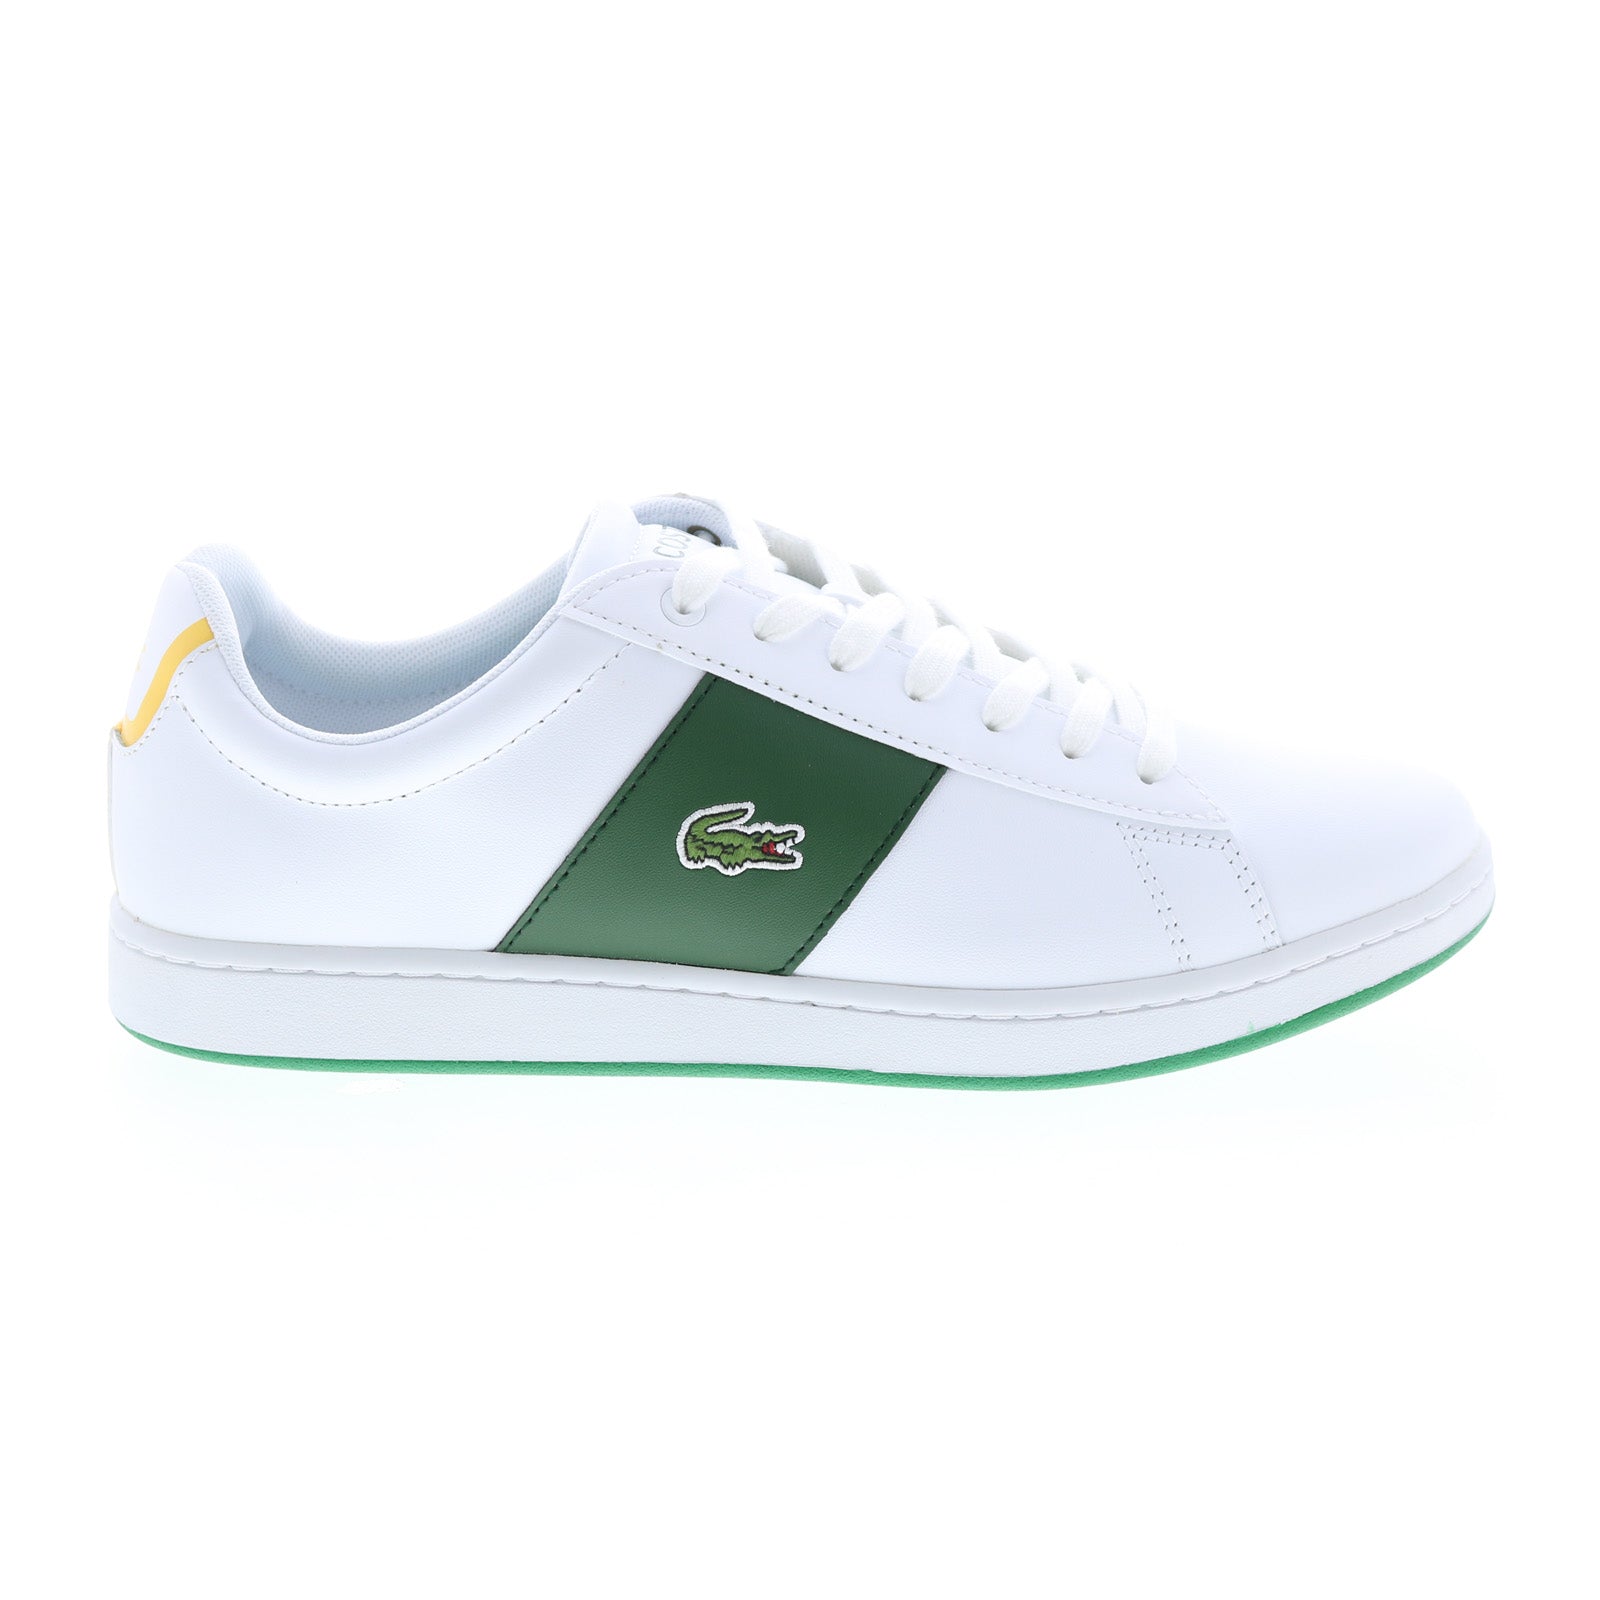 Lacoste Evo 0722 3 Sma Mens White Leather Lifestyle Sneakers S - Ruze Shoes